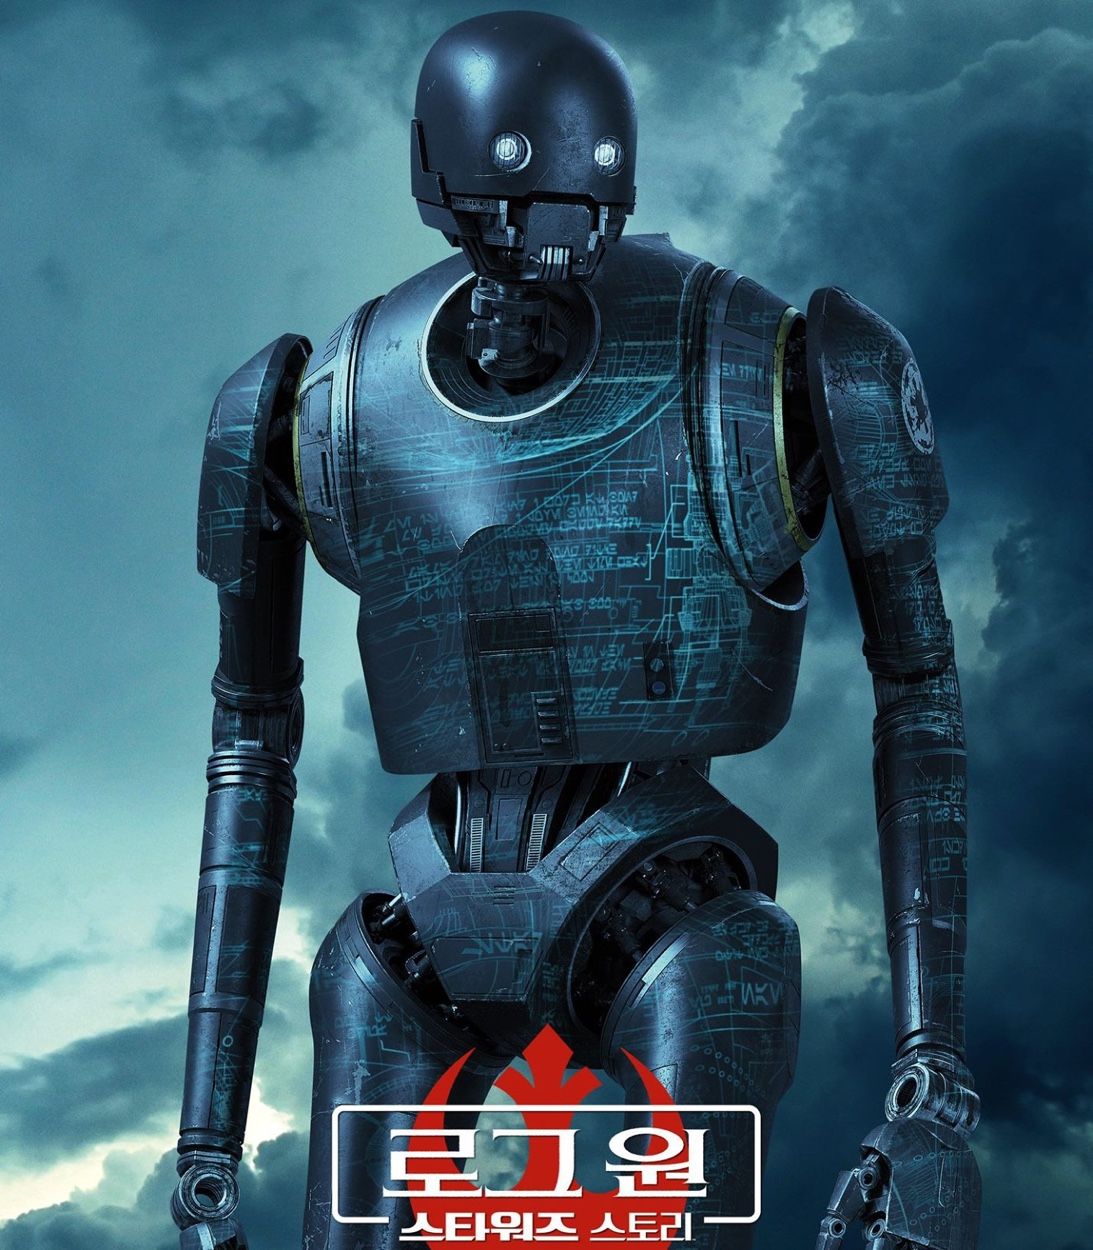 K-2SO Rogue One poster vertical TLDR